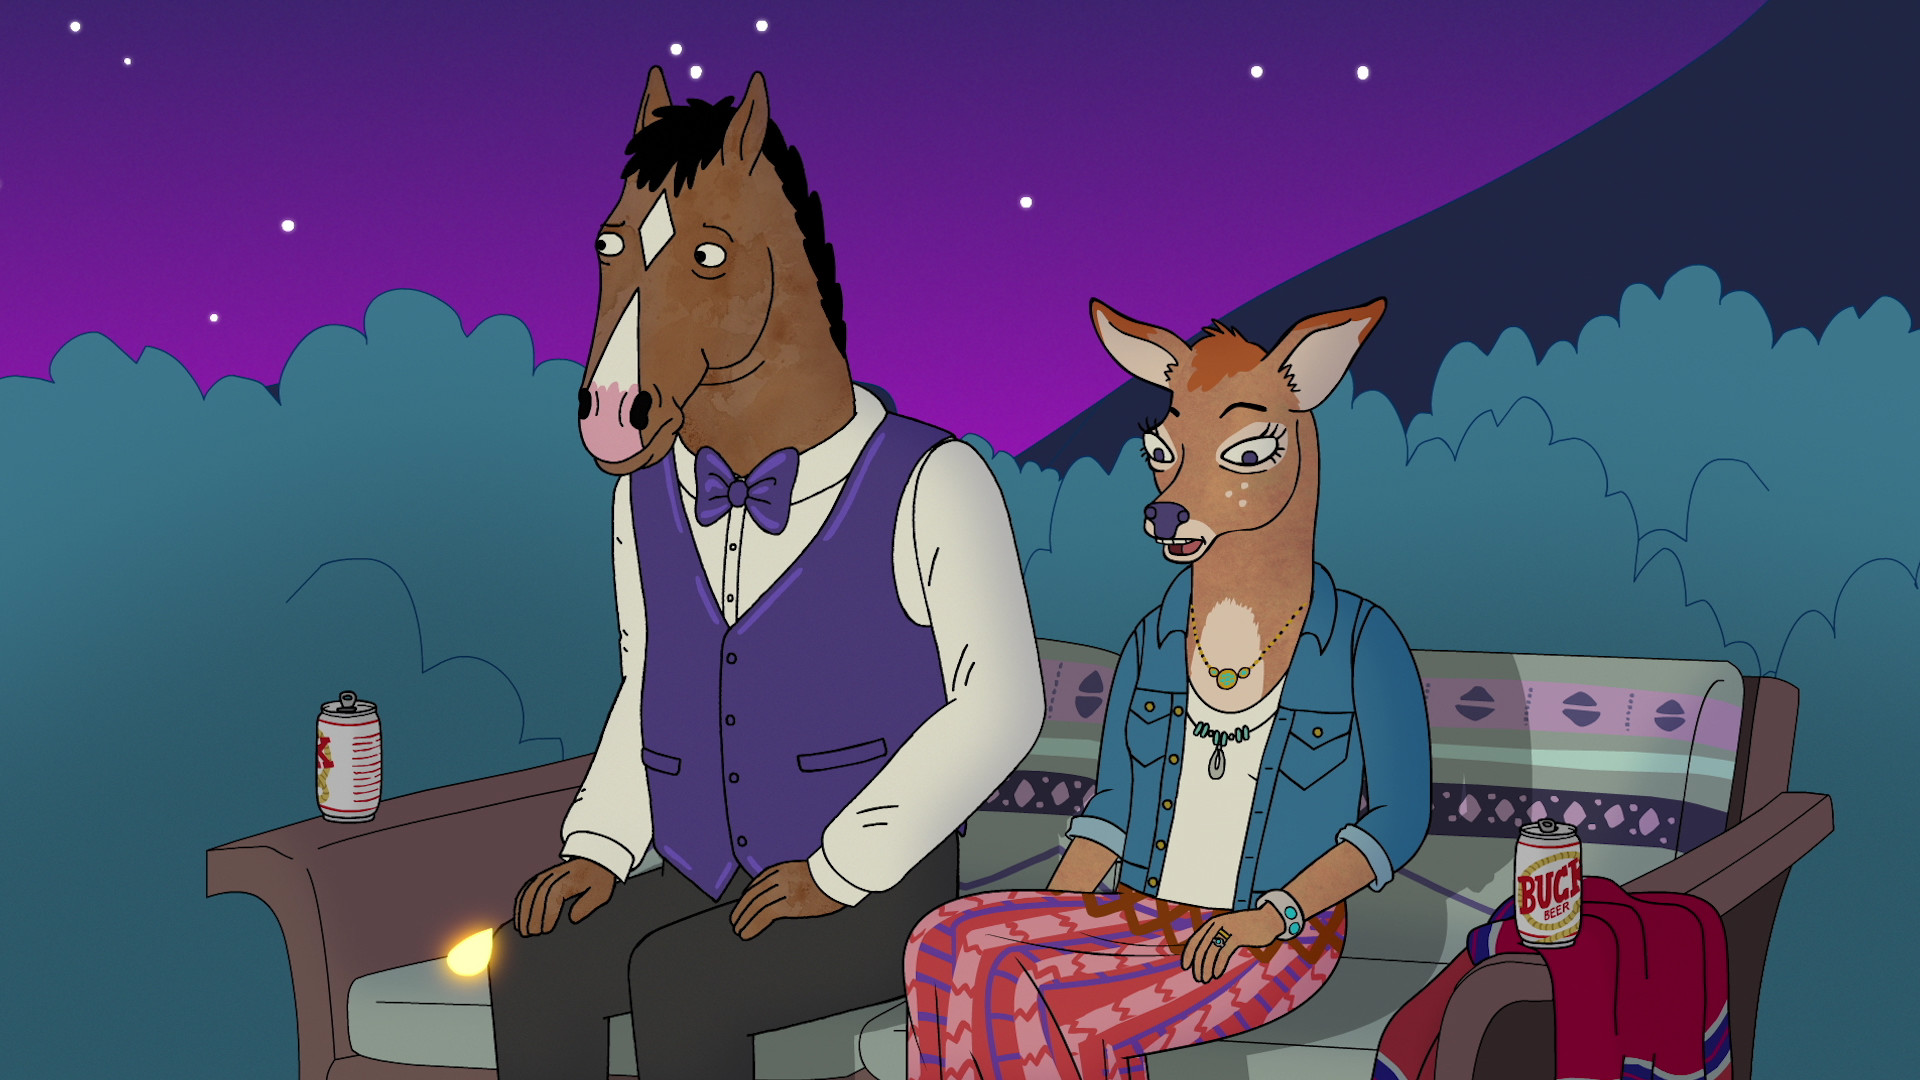 1920x1080 BoJack Horseman goes to visit an old friend.